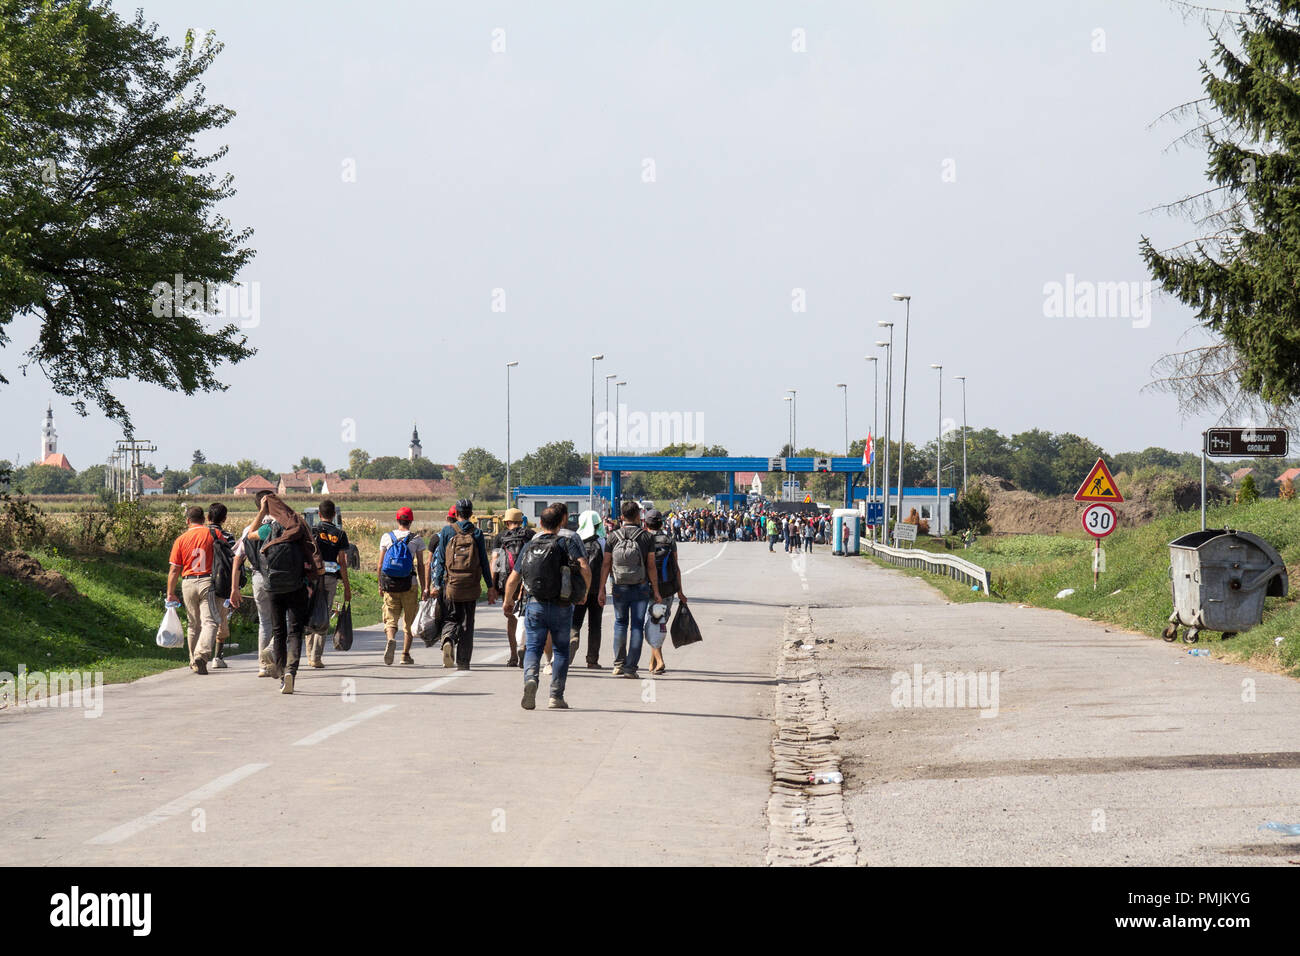 TOVARNIK, CROATIA - SEPTEMBER 19, 2015: Refugees gathering in front of the Serbia-Croatia border crossing of Sid Tovarnik on the Balkans Route, during Stock Photo